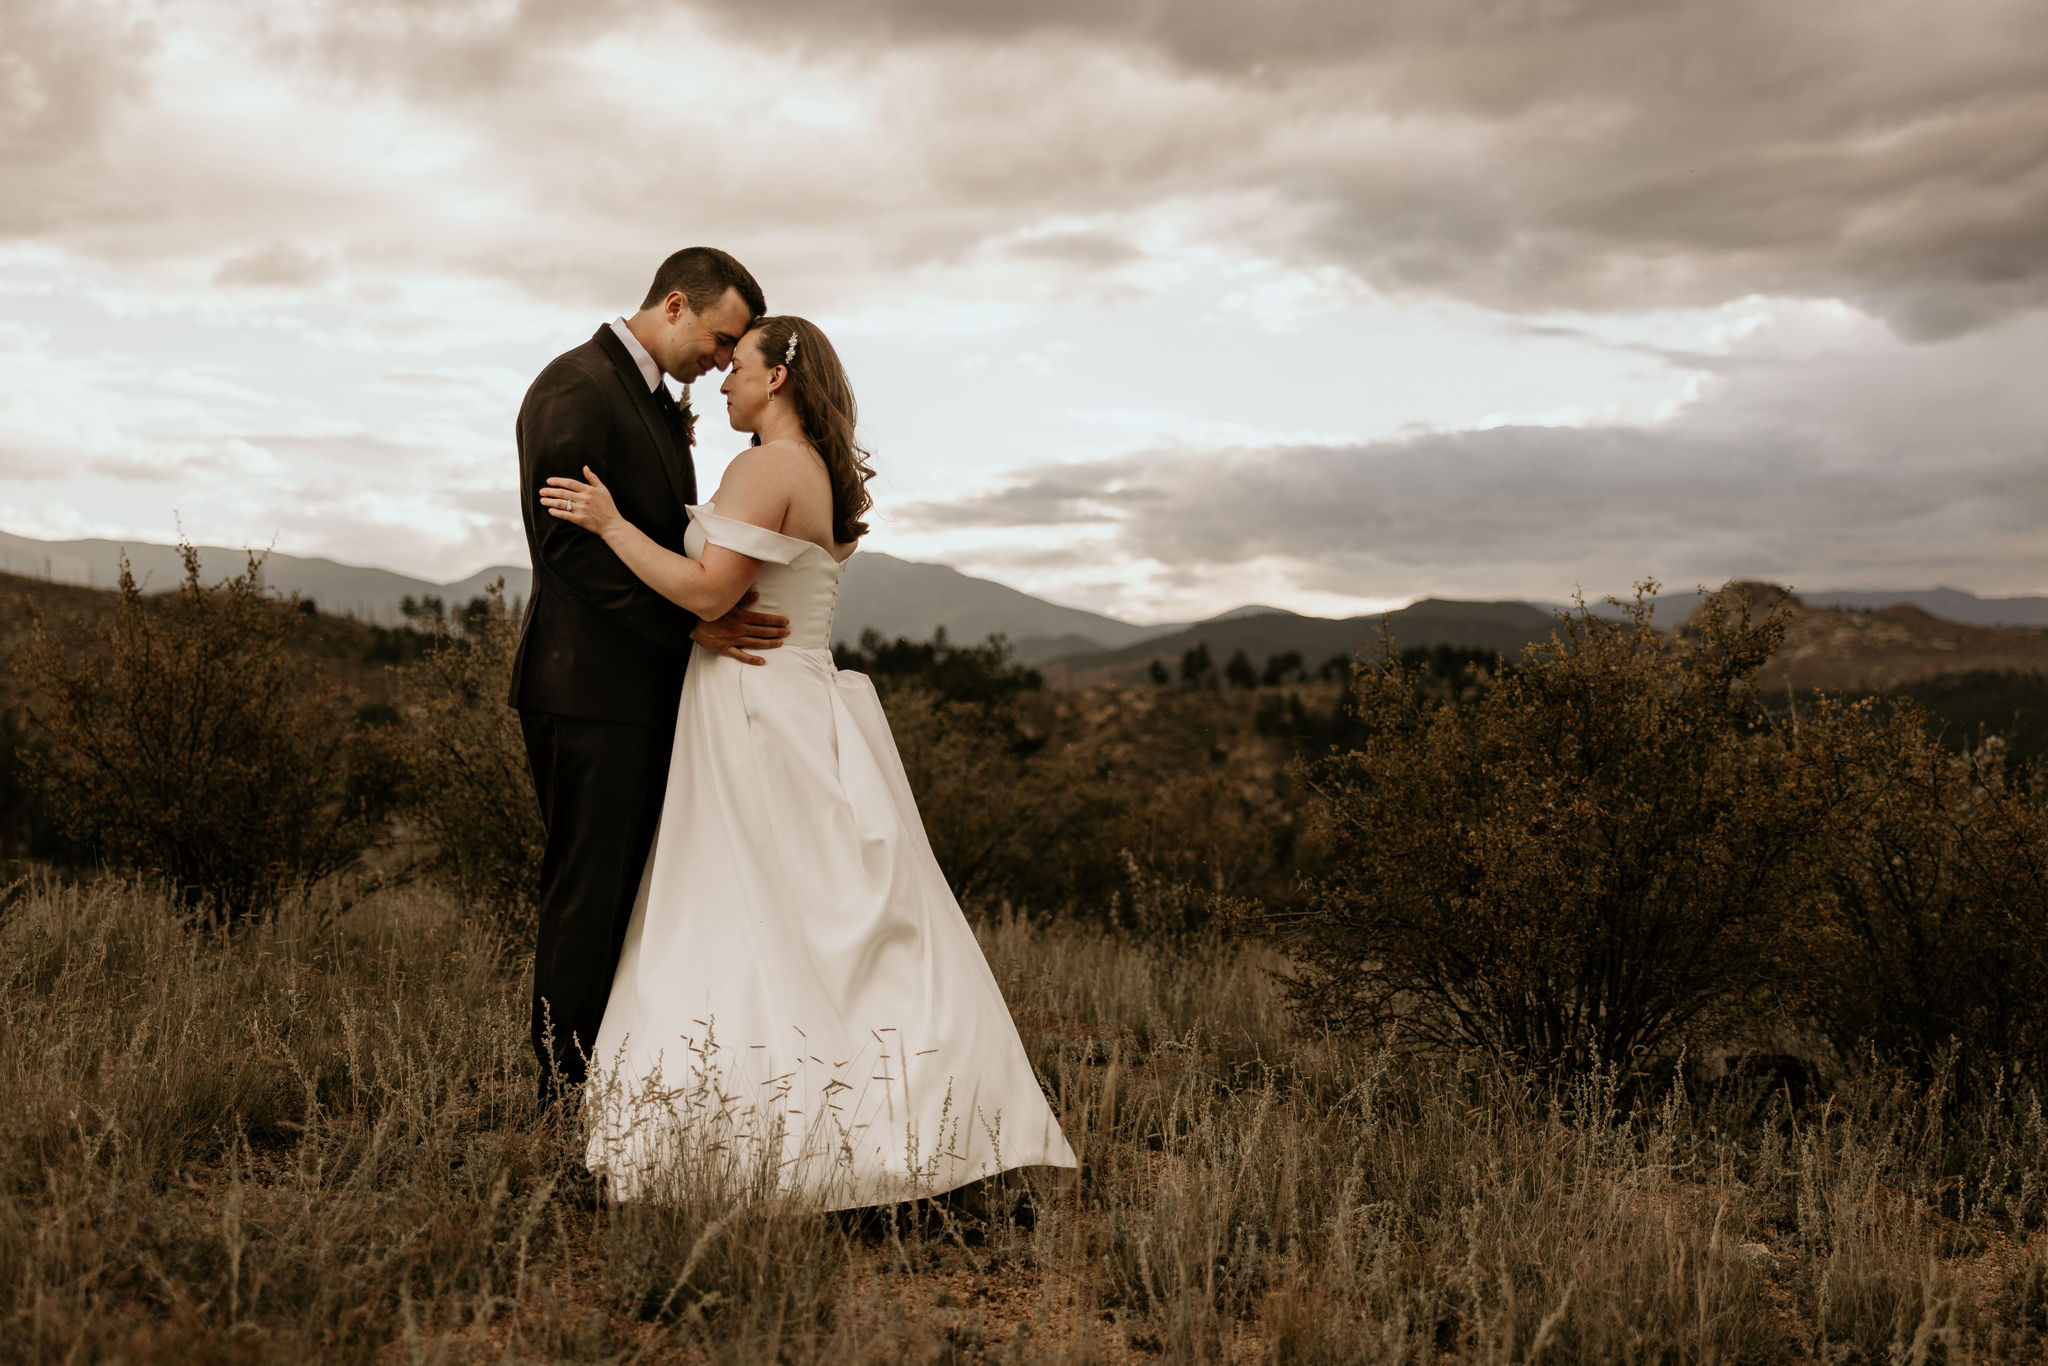 bride and groom press their heads together during sunset with the mountains in the background during their colorado micro wedding.